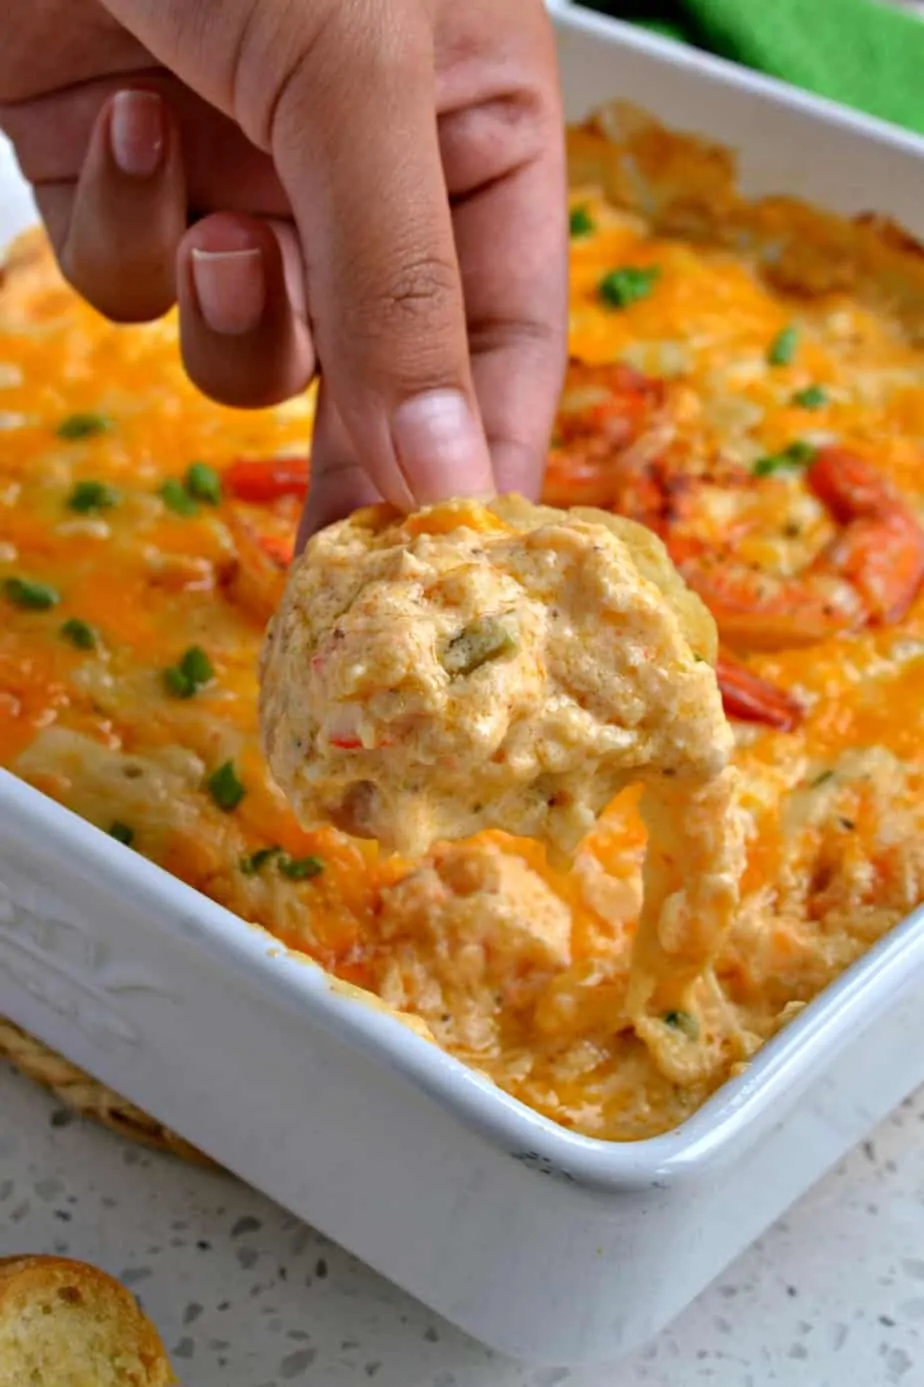 The creamy cheddar, pepper jack and Old Bay seasoning really make this winning Shrimp Dip one tasty treat.